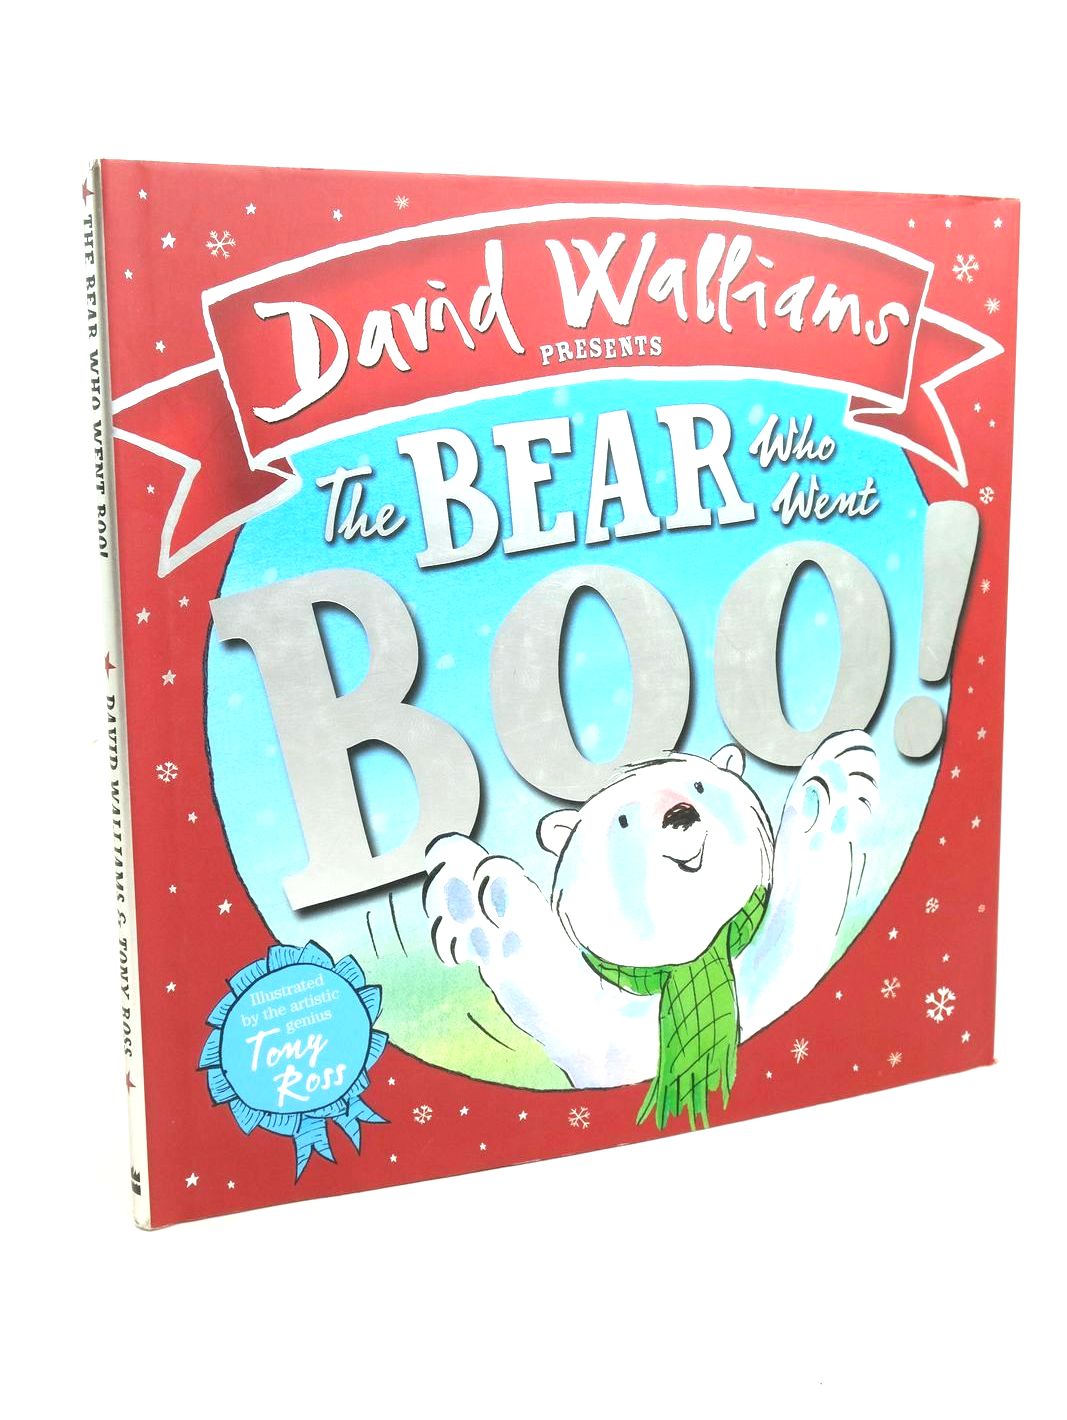 Photo of THE BEAR WHO WENT BOO! written by Walliams, David illustrated by Ross, Tony published by Harper Collins Childrens Books (STOCK CODE: 1322134)  for sale by Stella & Rose's Books